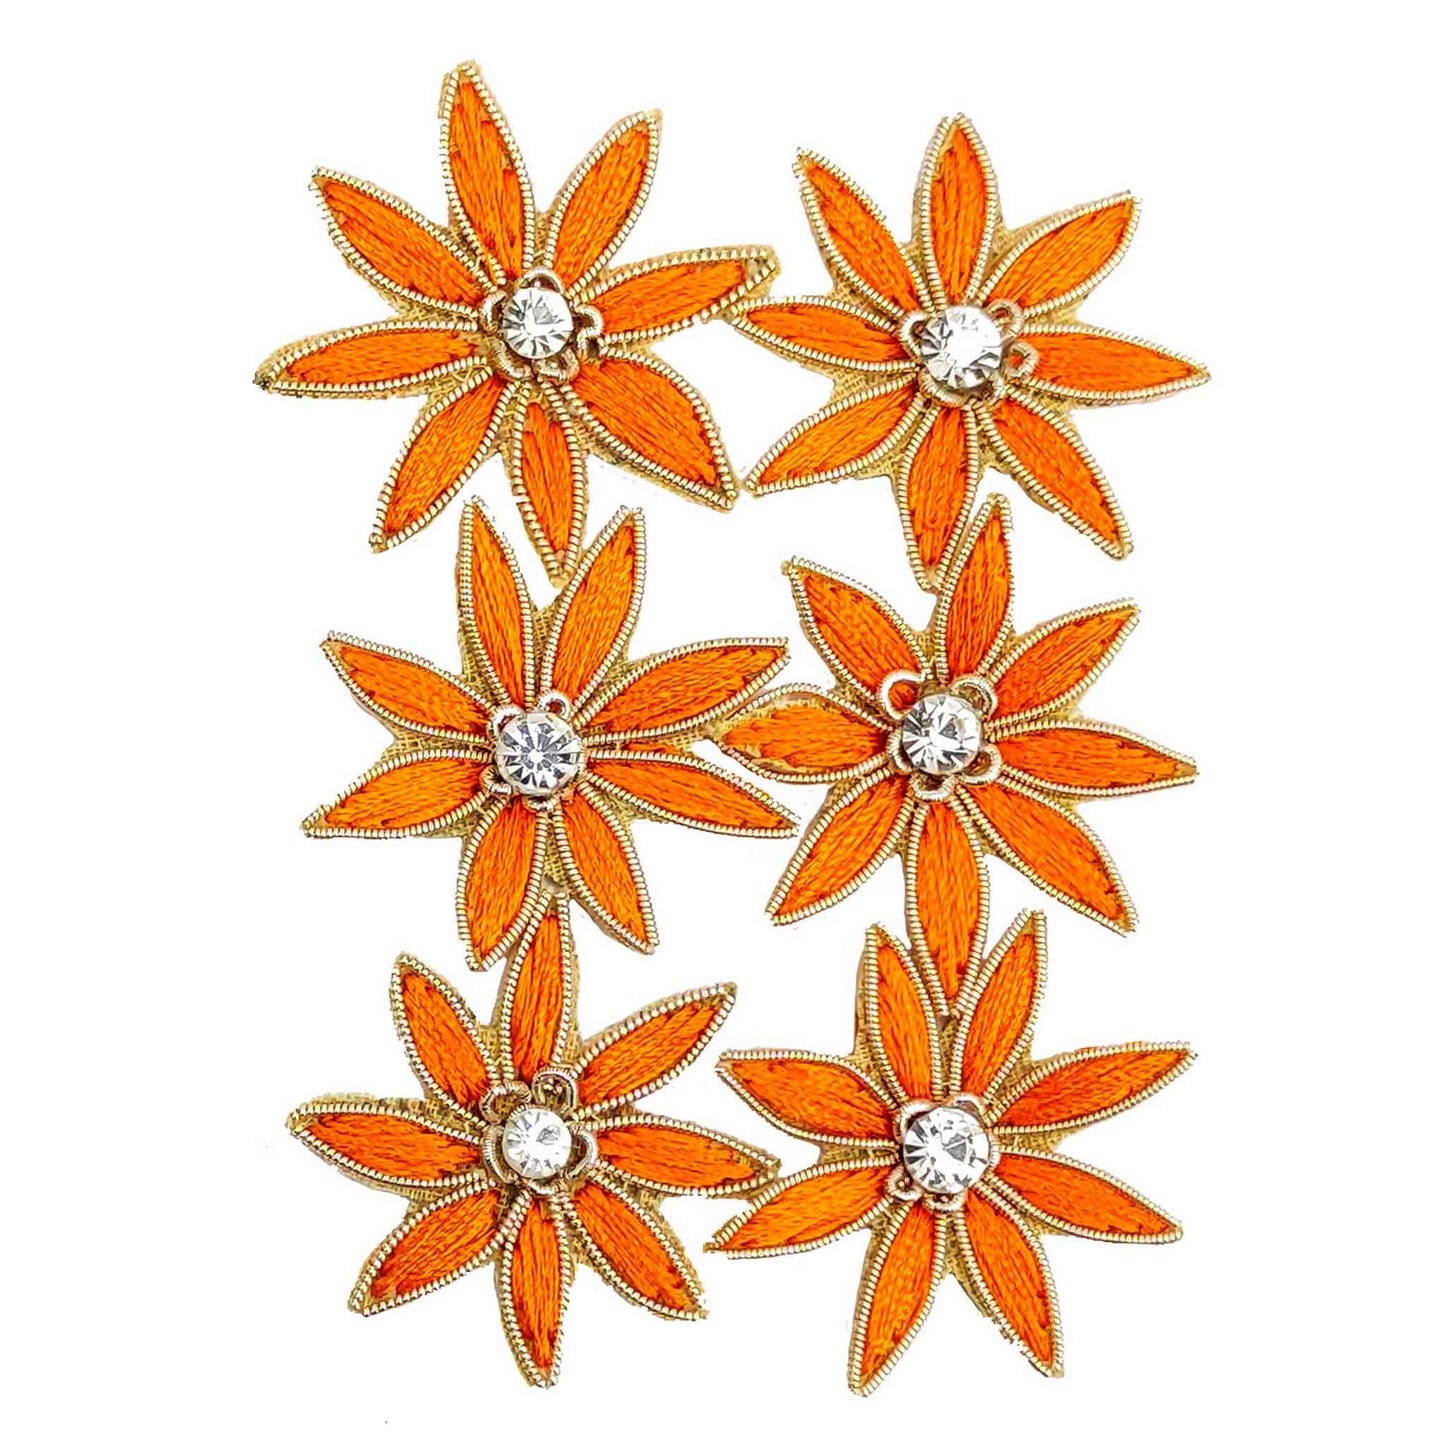 Indian Petals Threaded Strar Style Buti for DIY Craft, Trousseau Packing or Decoration (Bunch of 12) - Design 215, Orange - Indian Petals